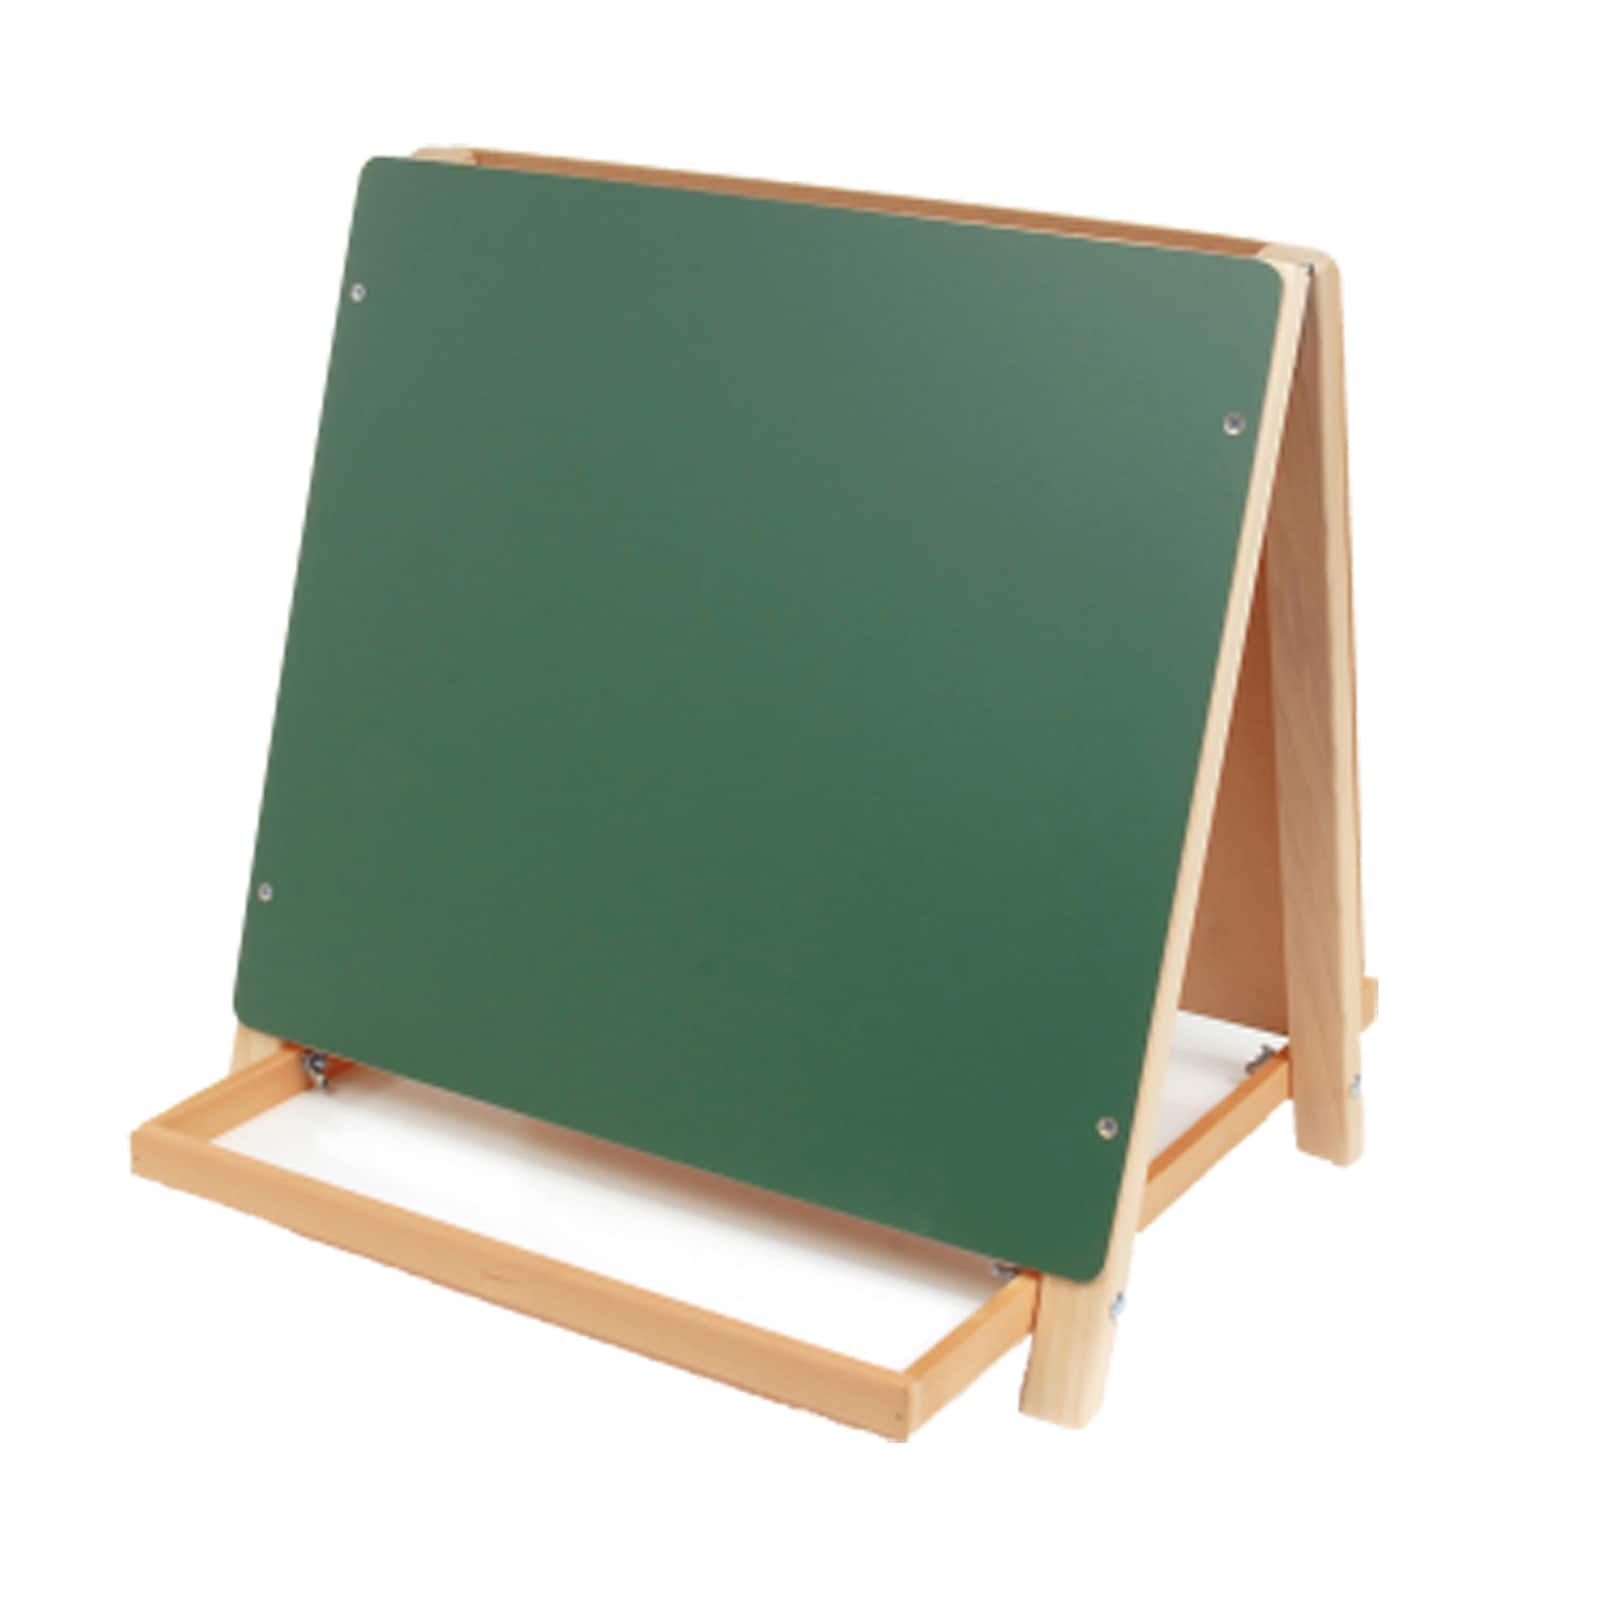 Flipside Dual Surface Table Top Easel